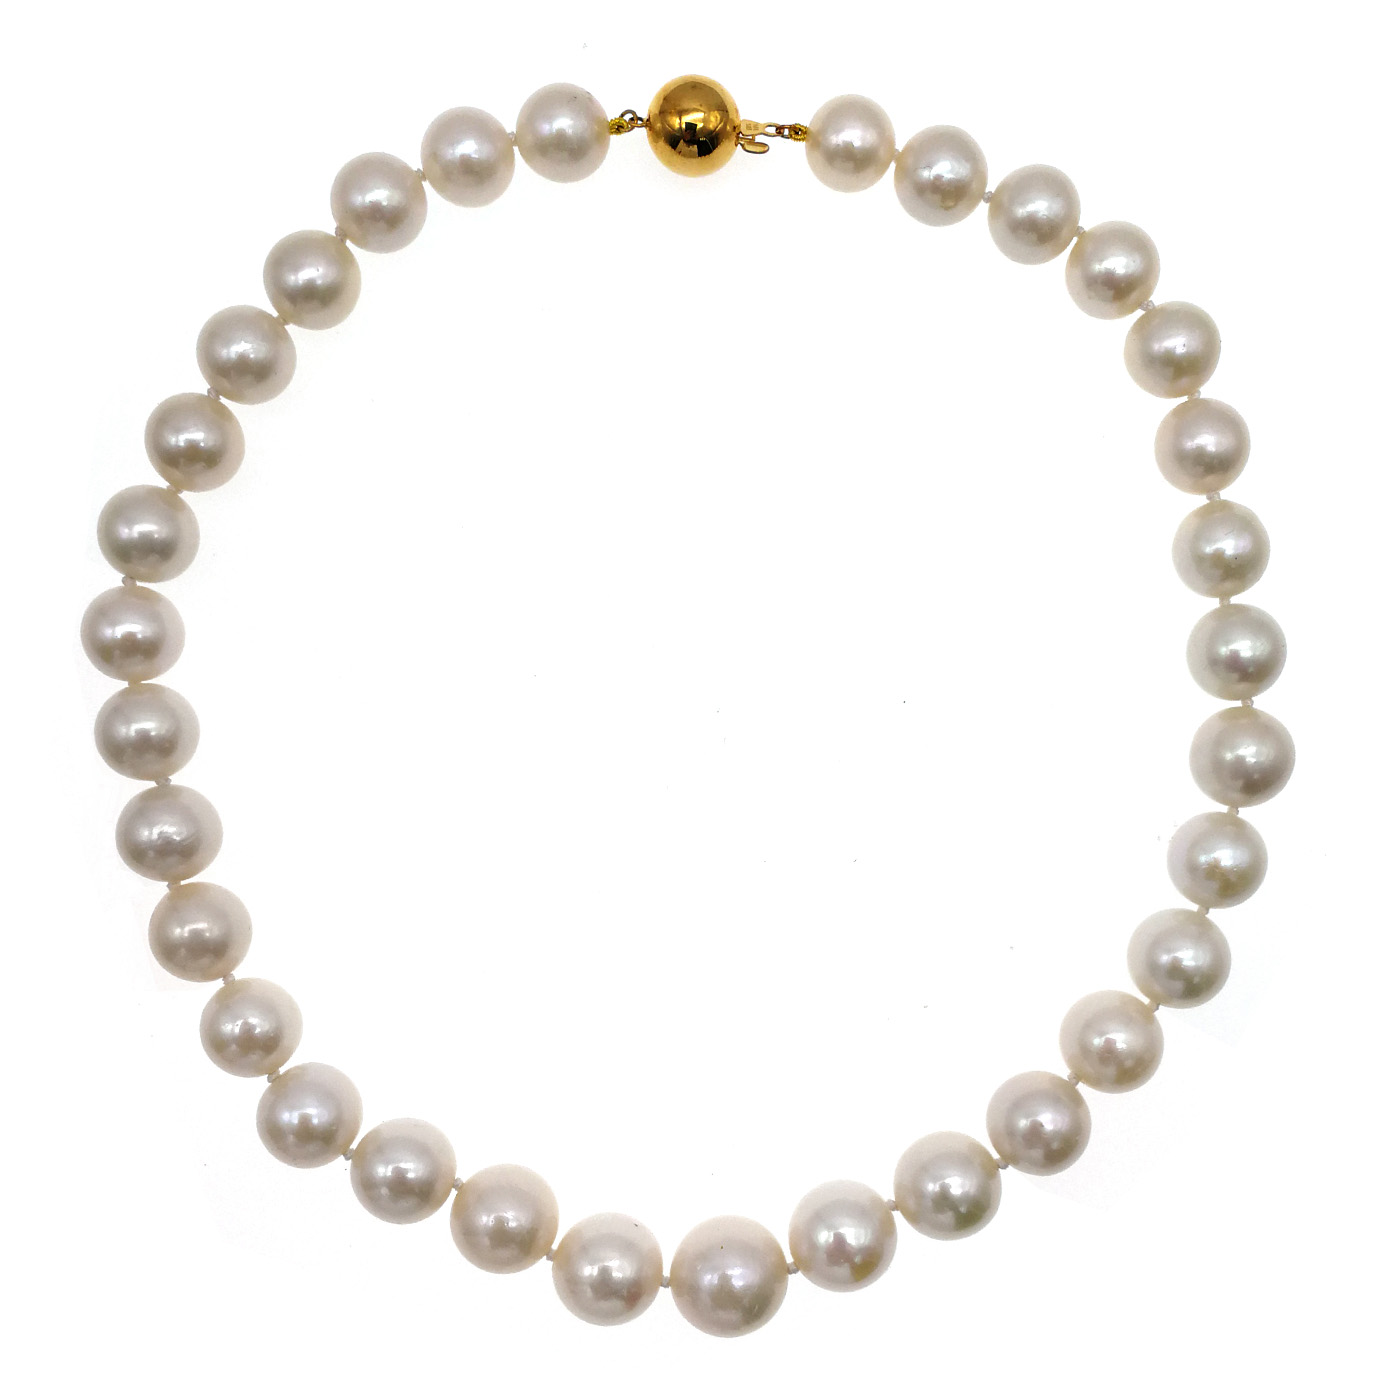 12-15mm Freshwater Pearl with 14K/585 Yellow Gold Ball Clasp Necklace